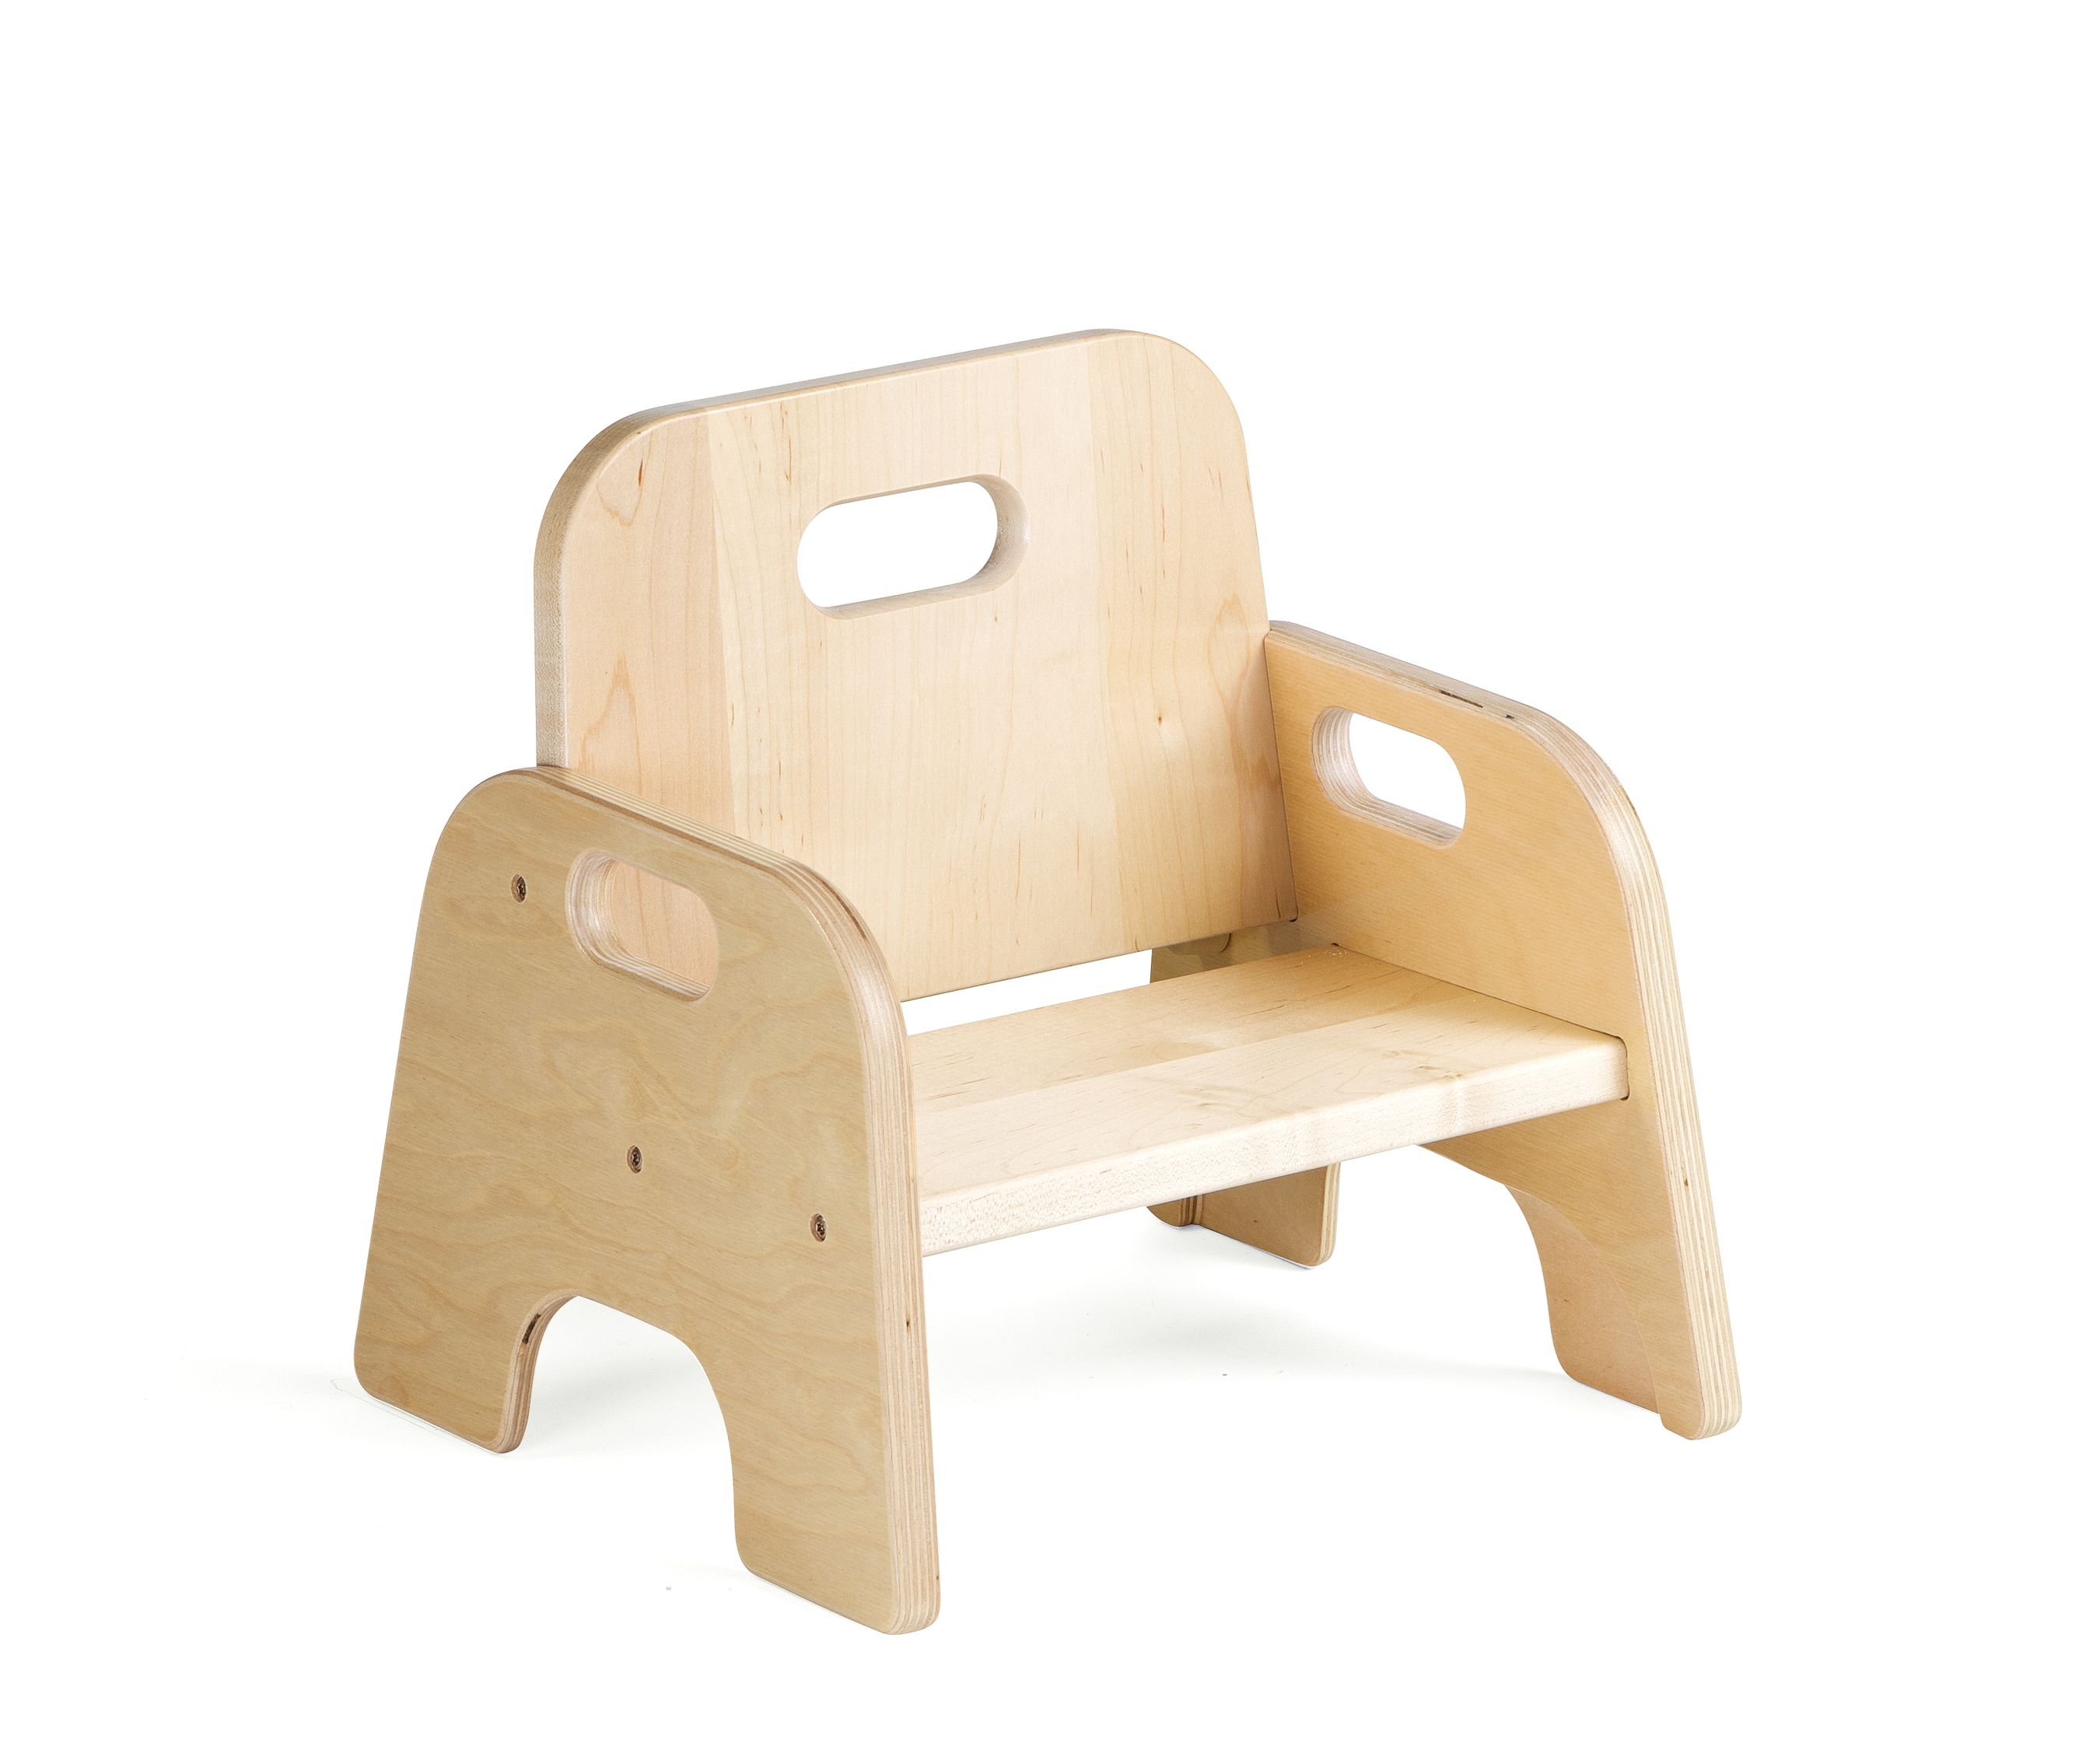 Move Stackable Chairs & Classroom Seating